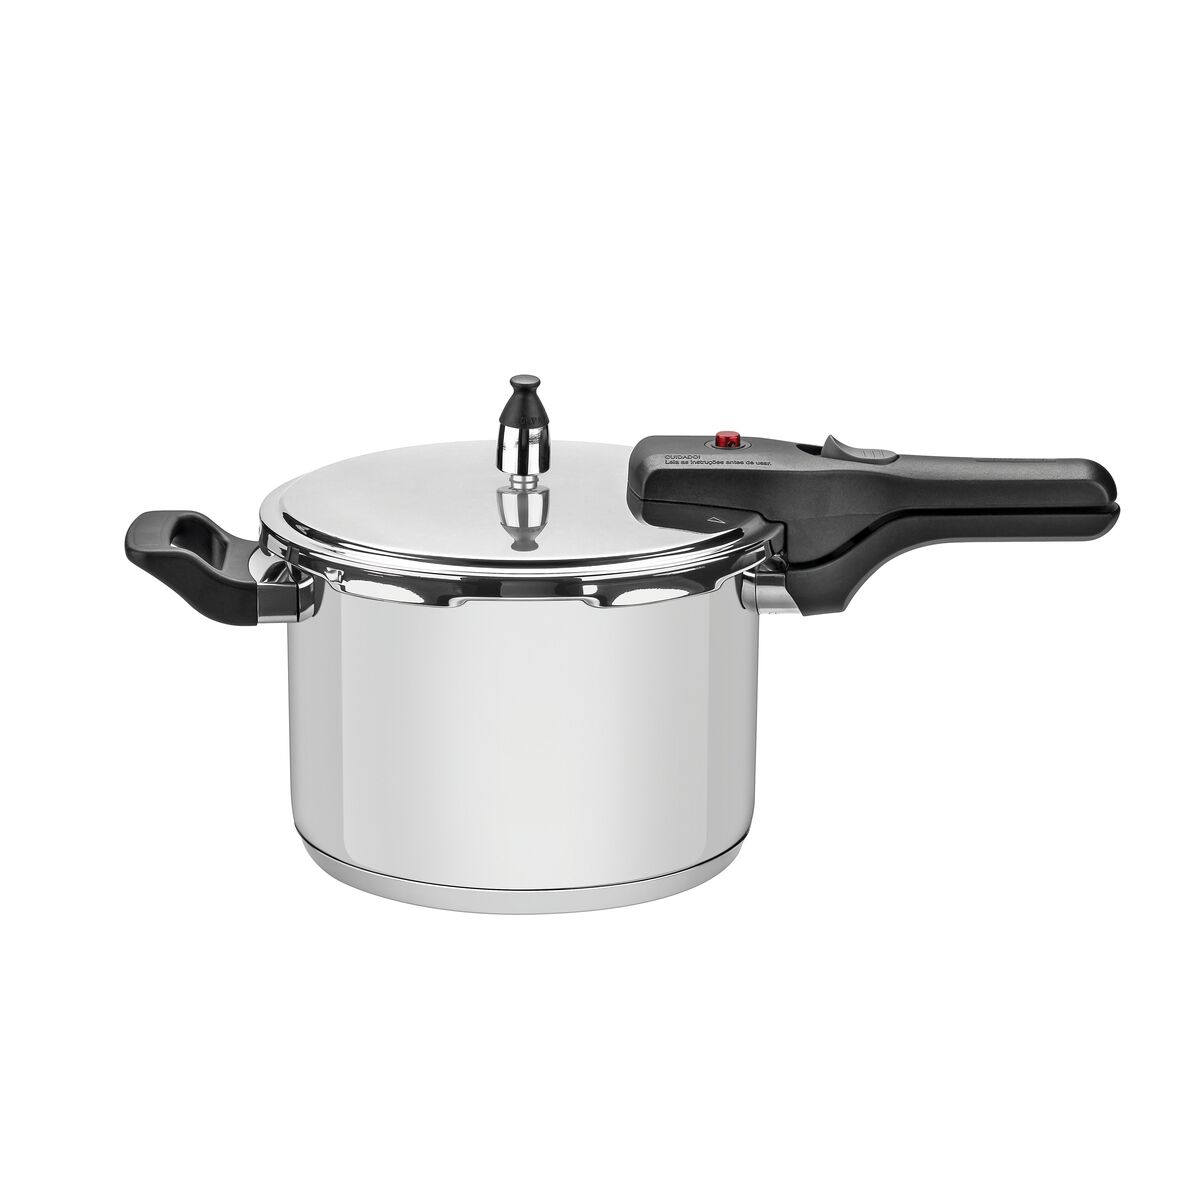 Tramontina Brava stainless steel pressure cooker with tri-ply base, 20 cm and 4.5 L